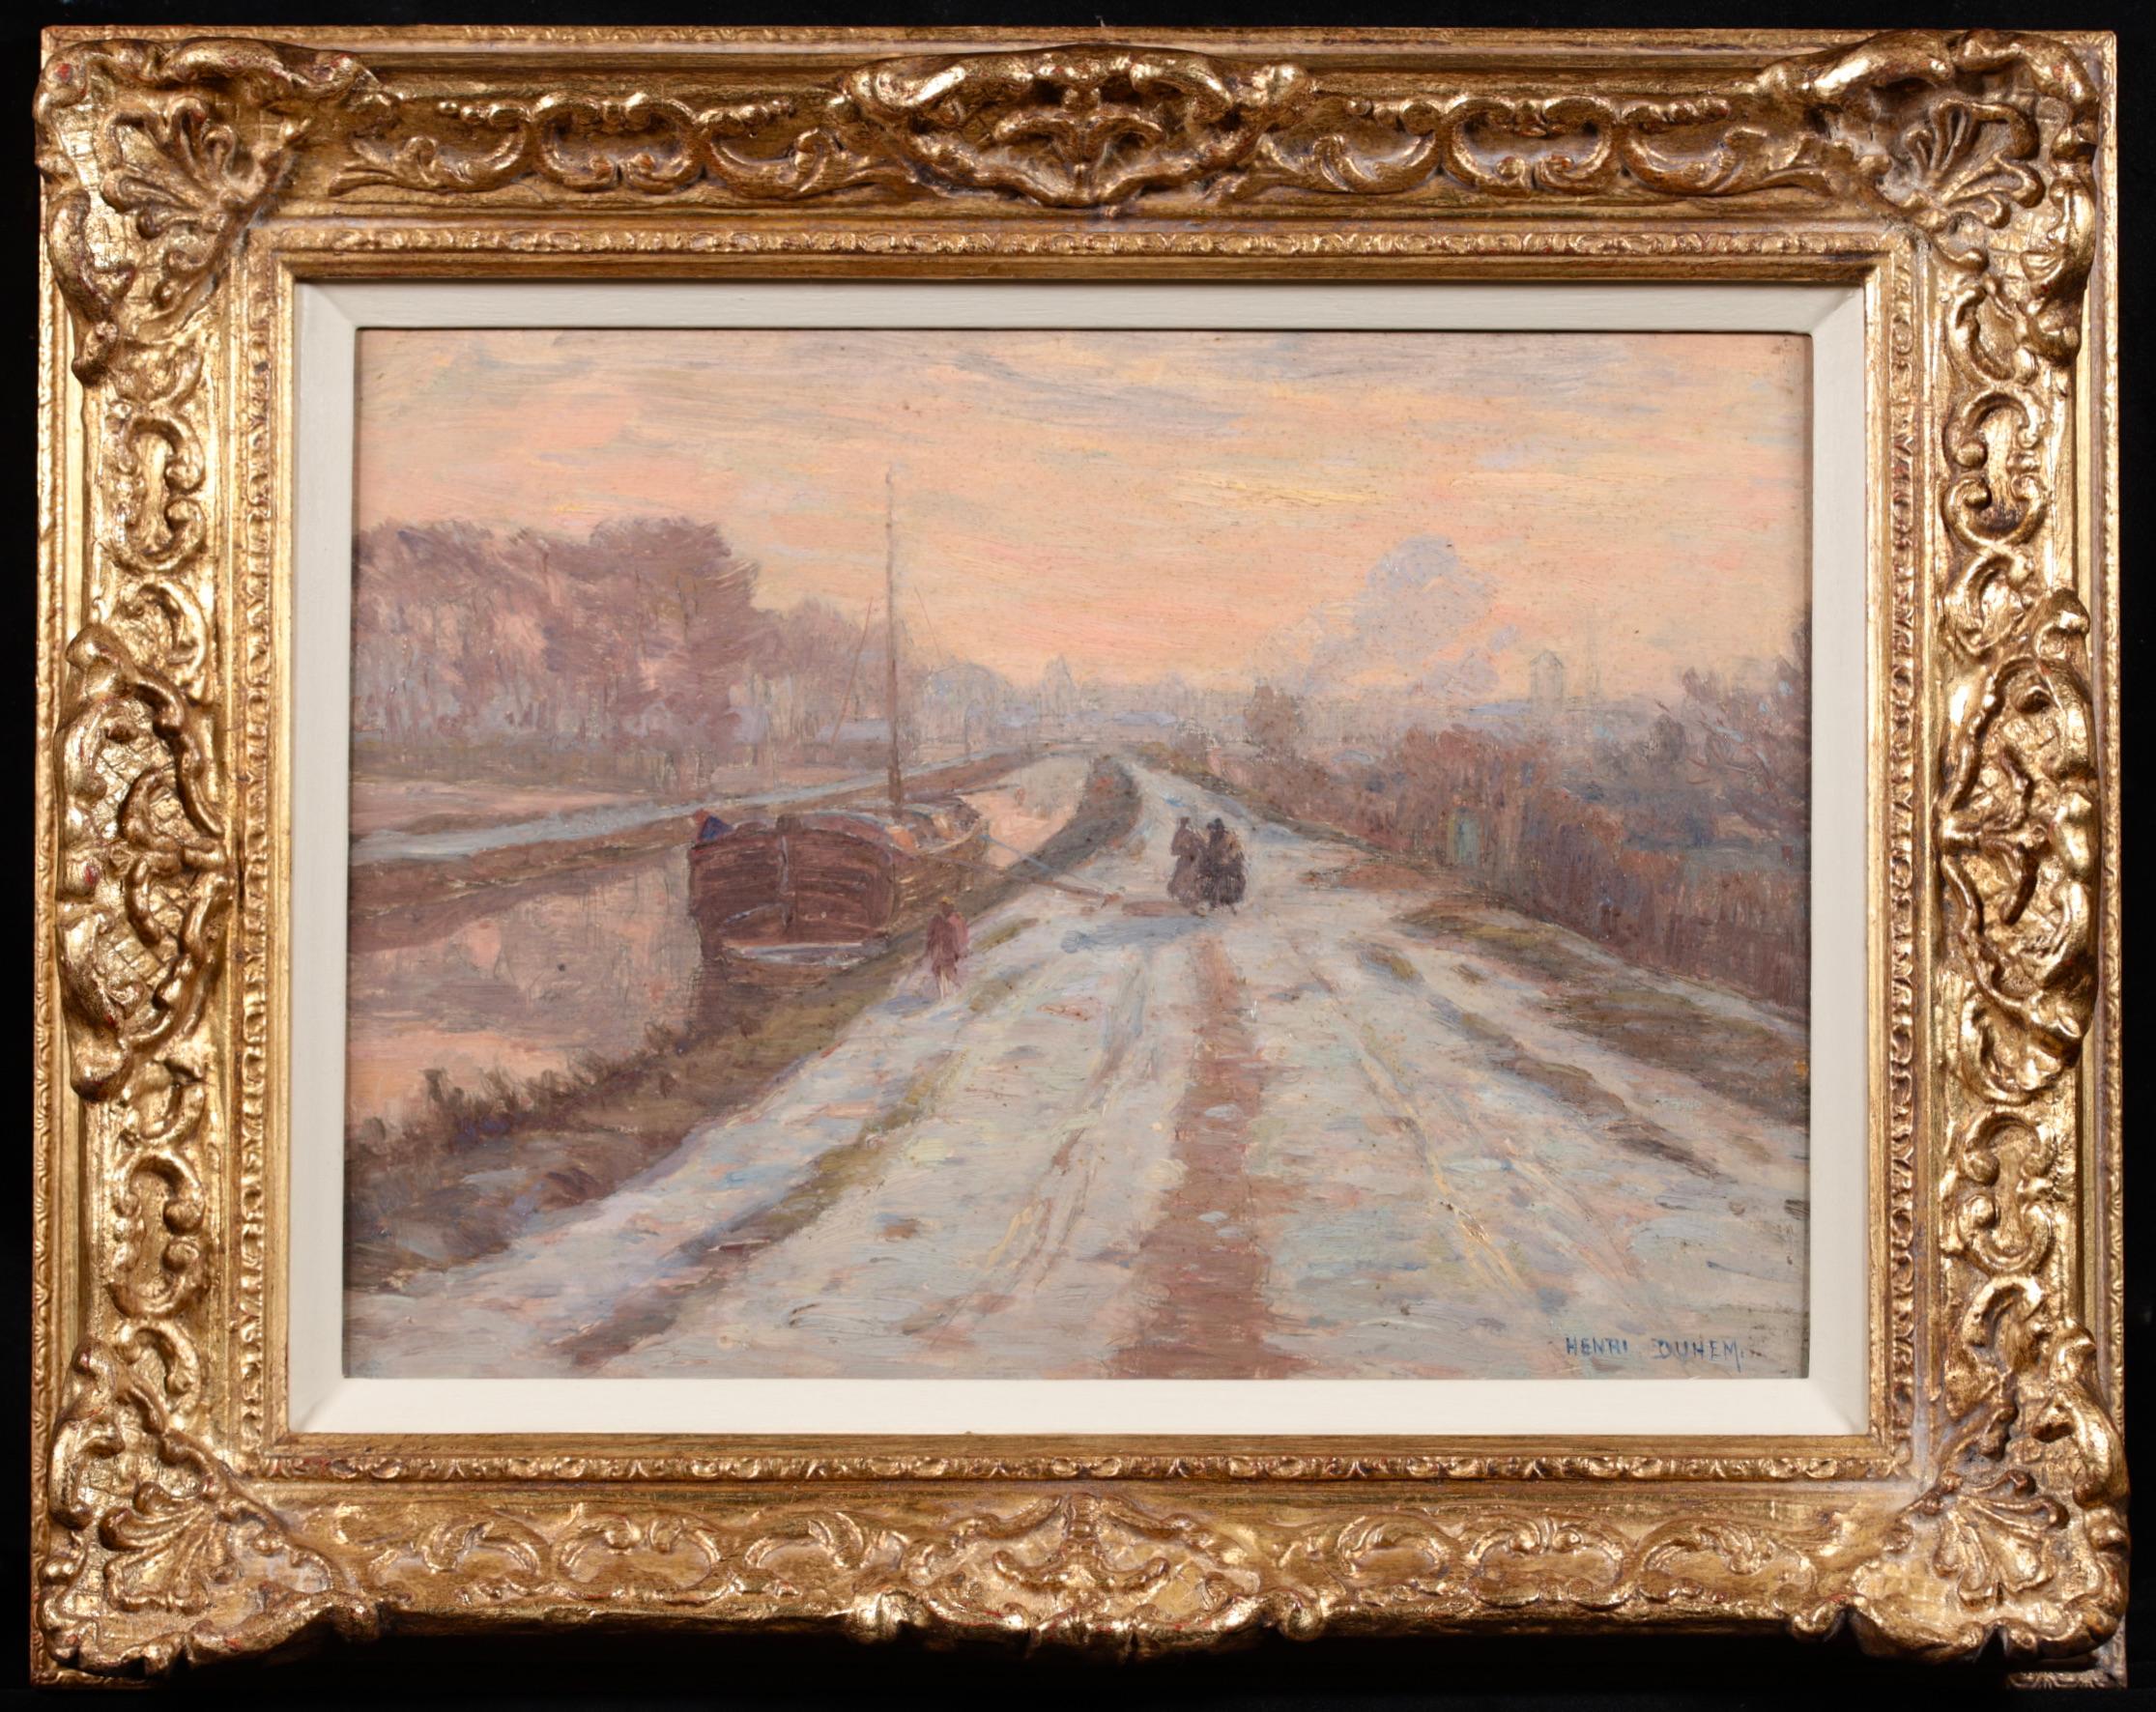 Signed and dated oil on panel winter landscape by French impressionist painter Henri Duhem. This beautiful piece depicts a view of figures on a snow-covered path beside a canal boat on the canal in Douai. The trees that line the canal are bare.